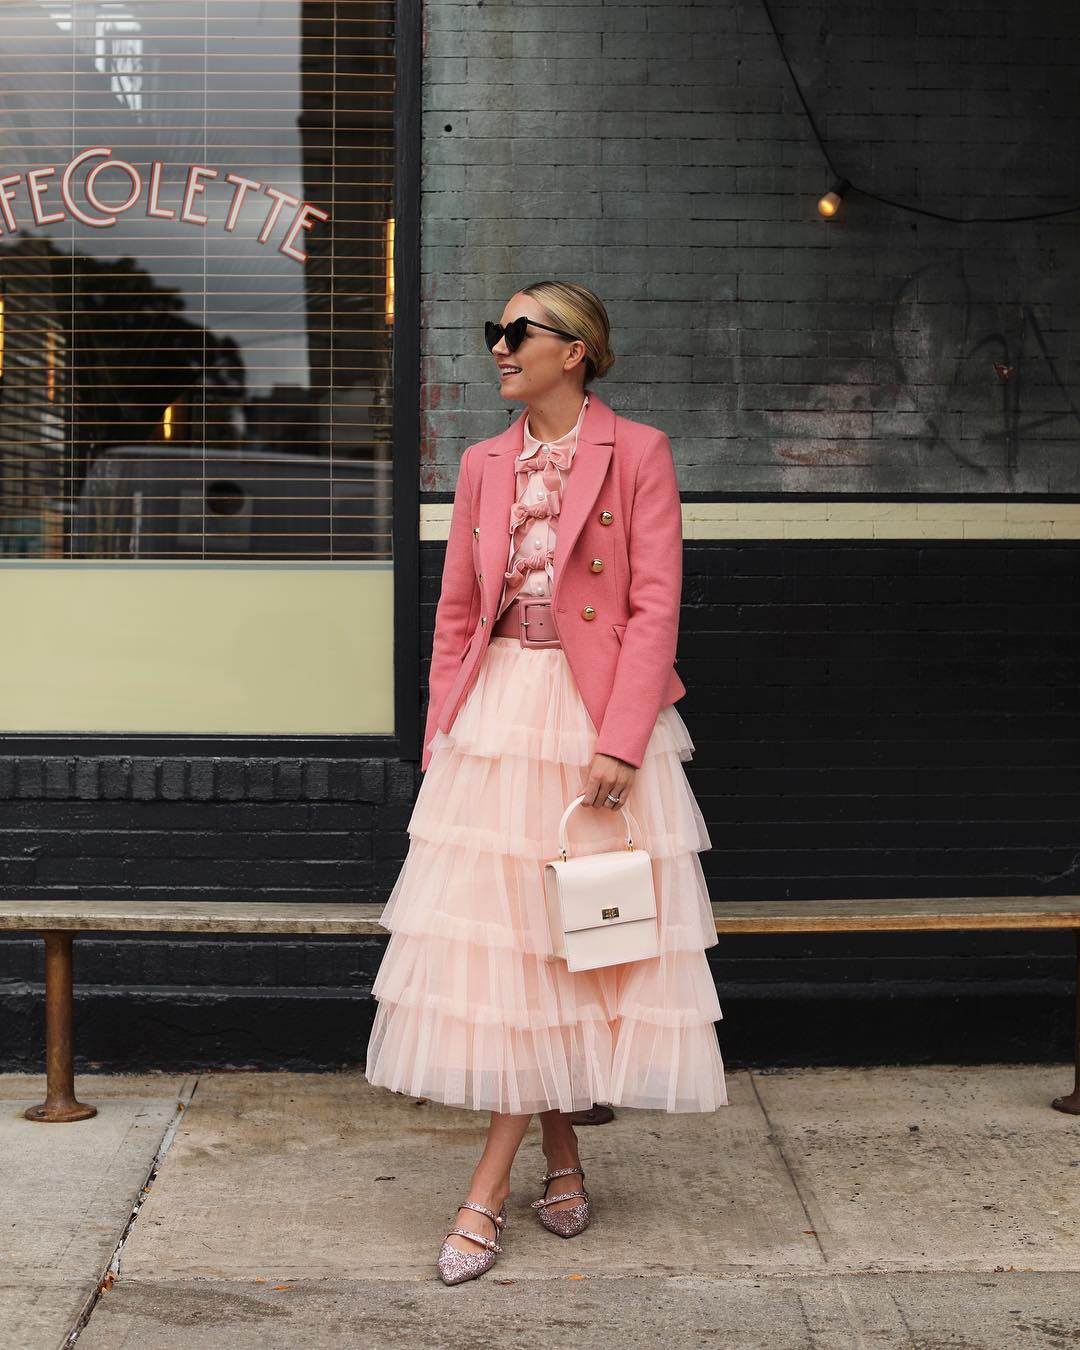 New York Fashion Blogger BLAIR EADIE Will Make You Fall In Love With Skirts  All Over Again!